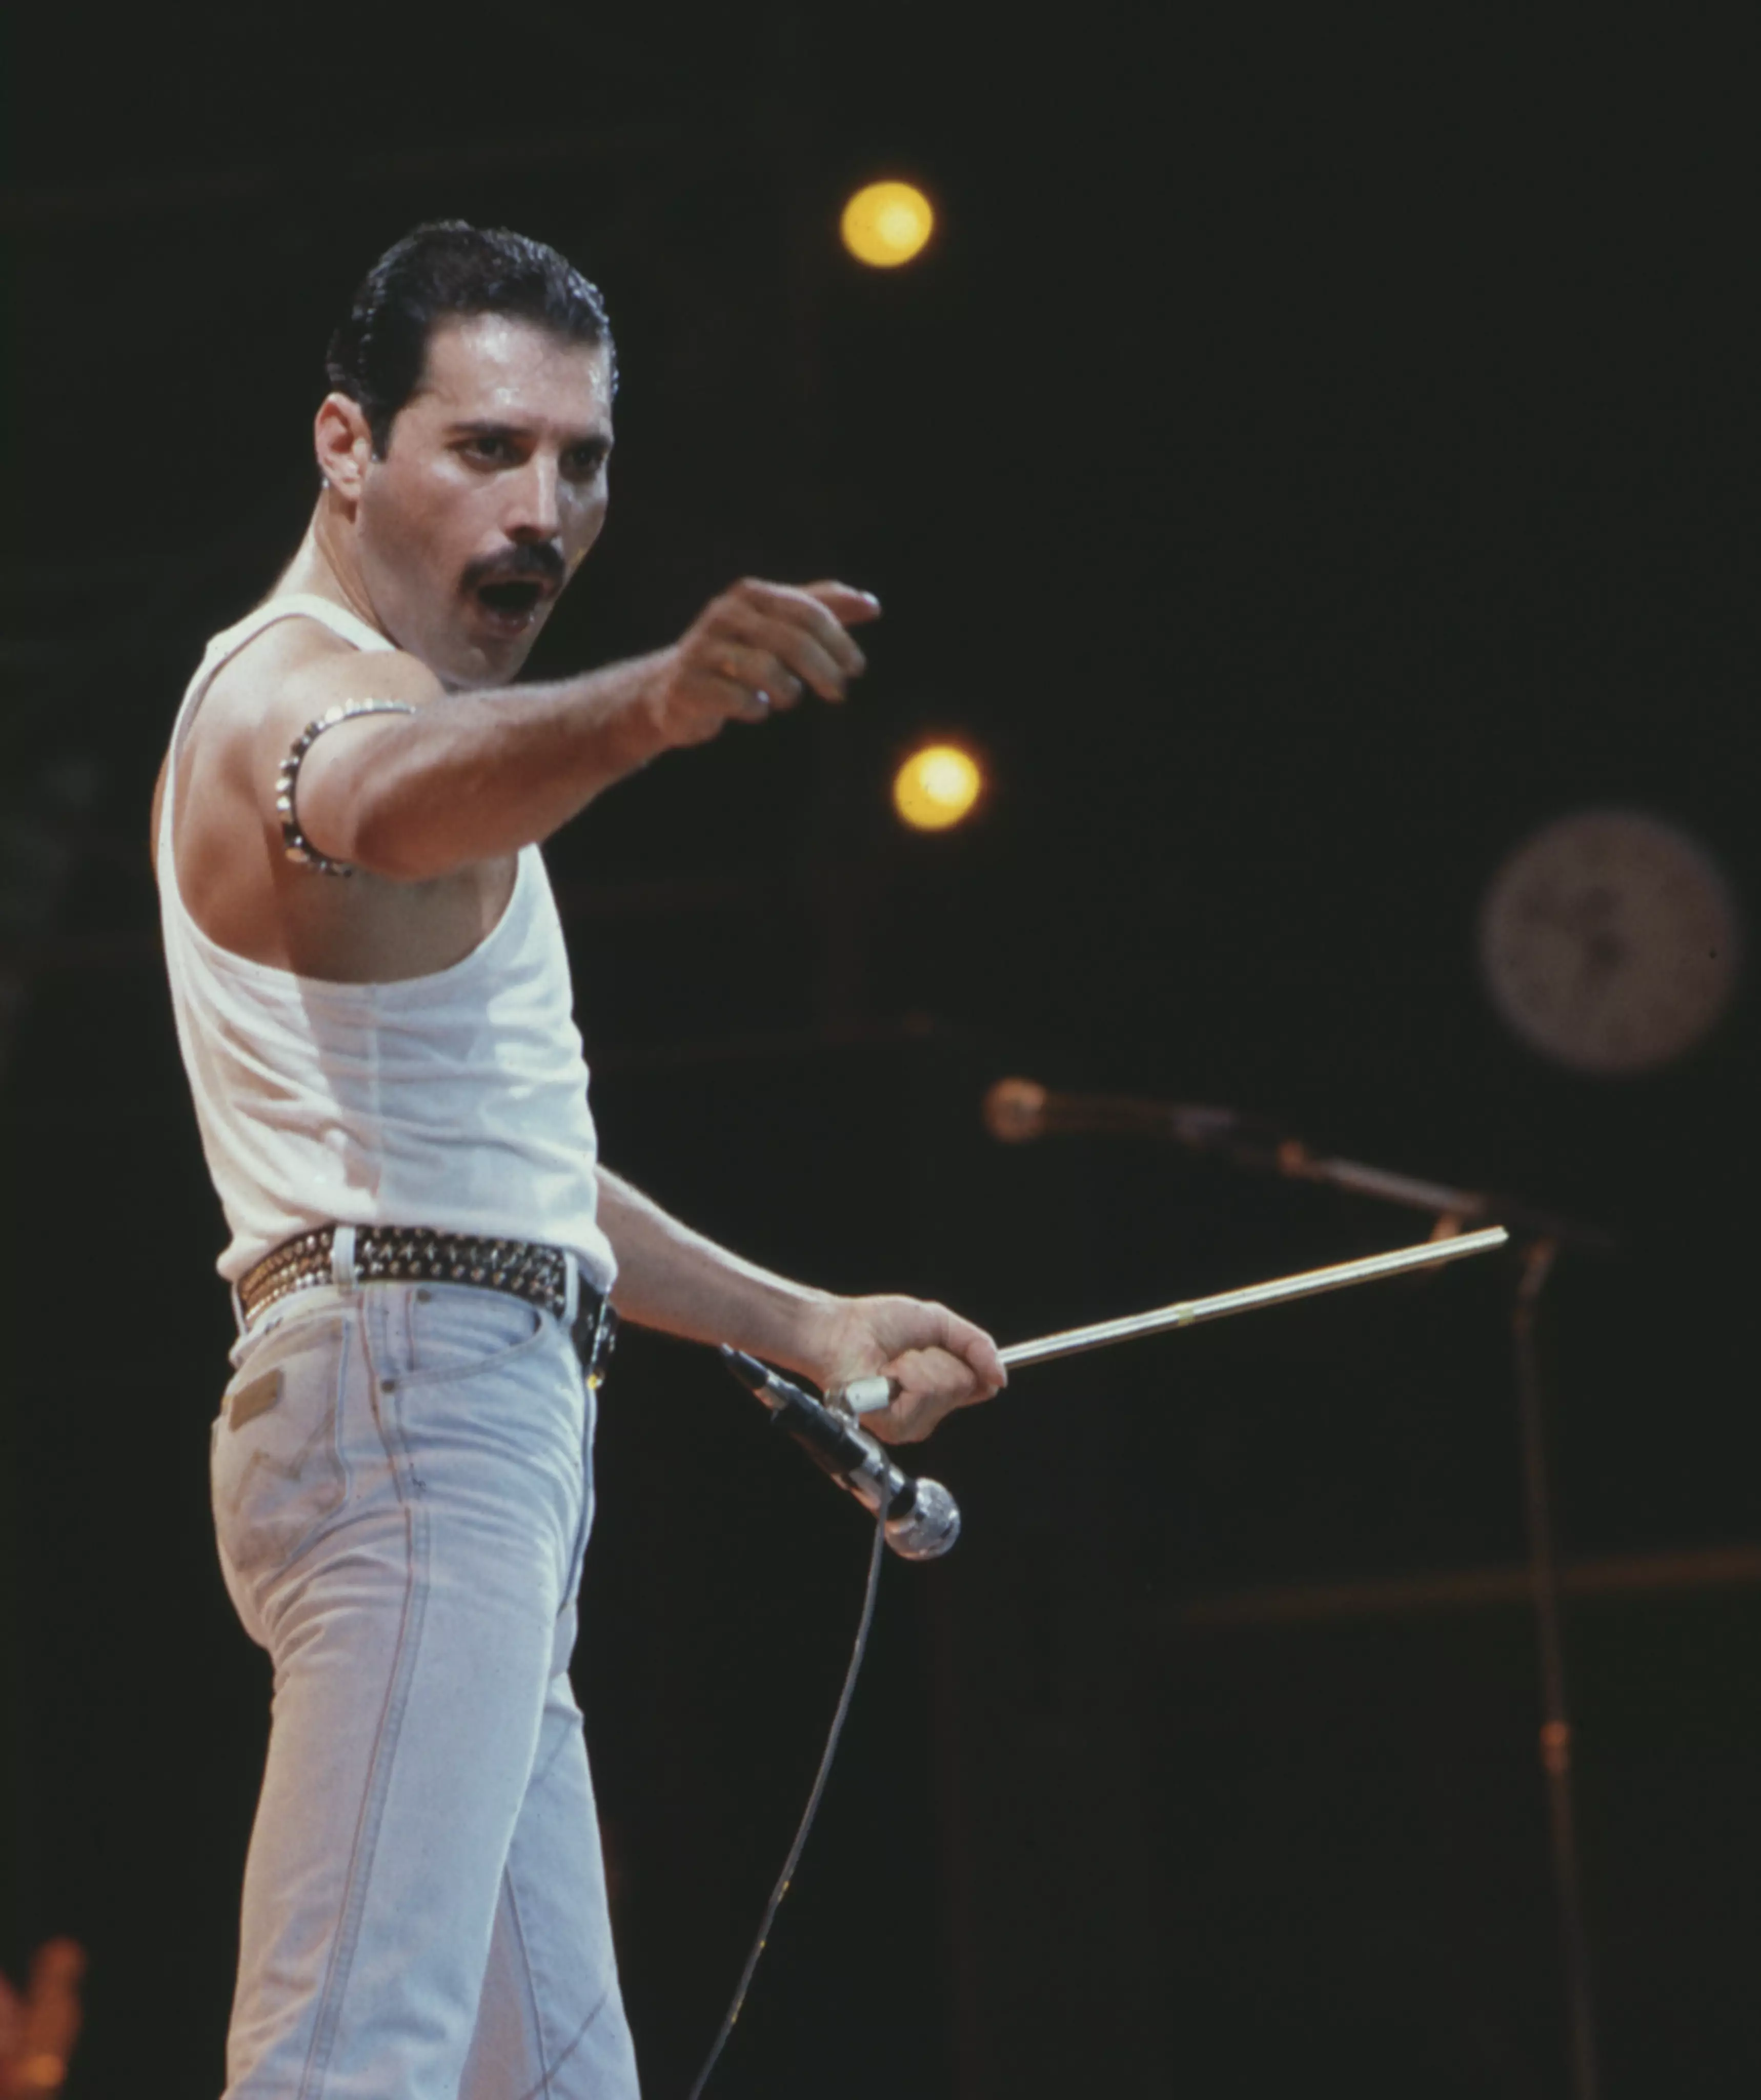 Today marks 34 years since Queen performed at Live Aid.